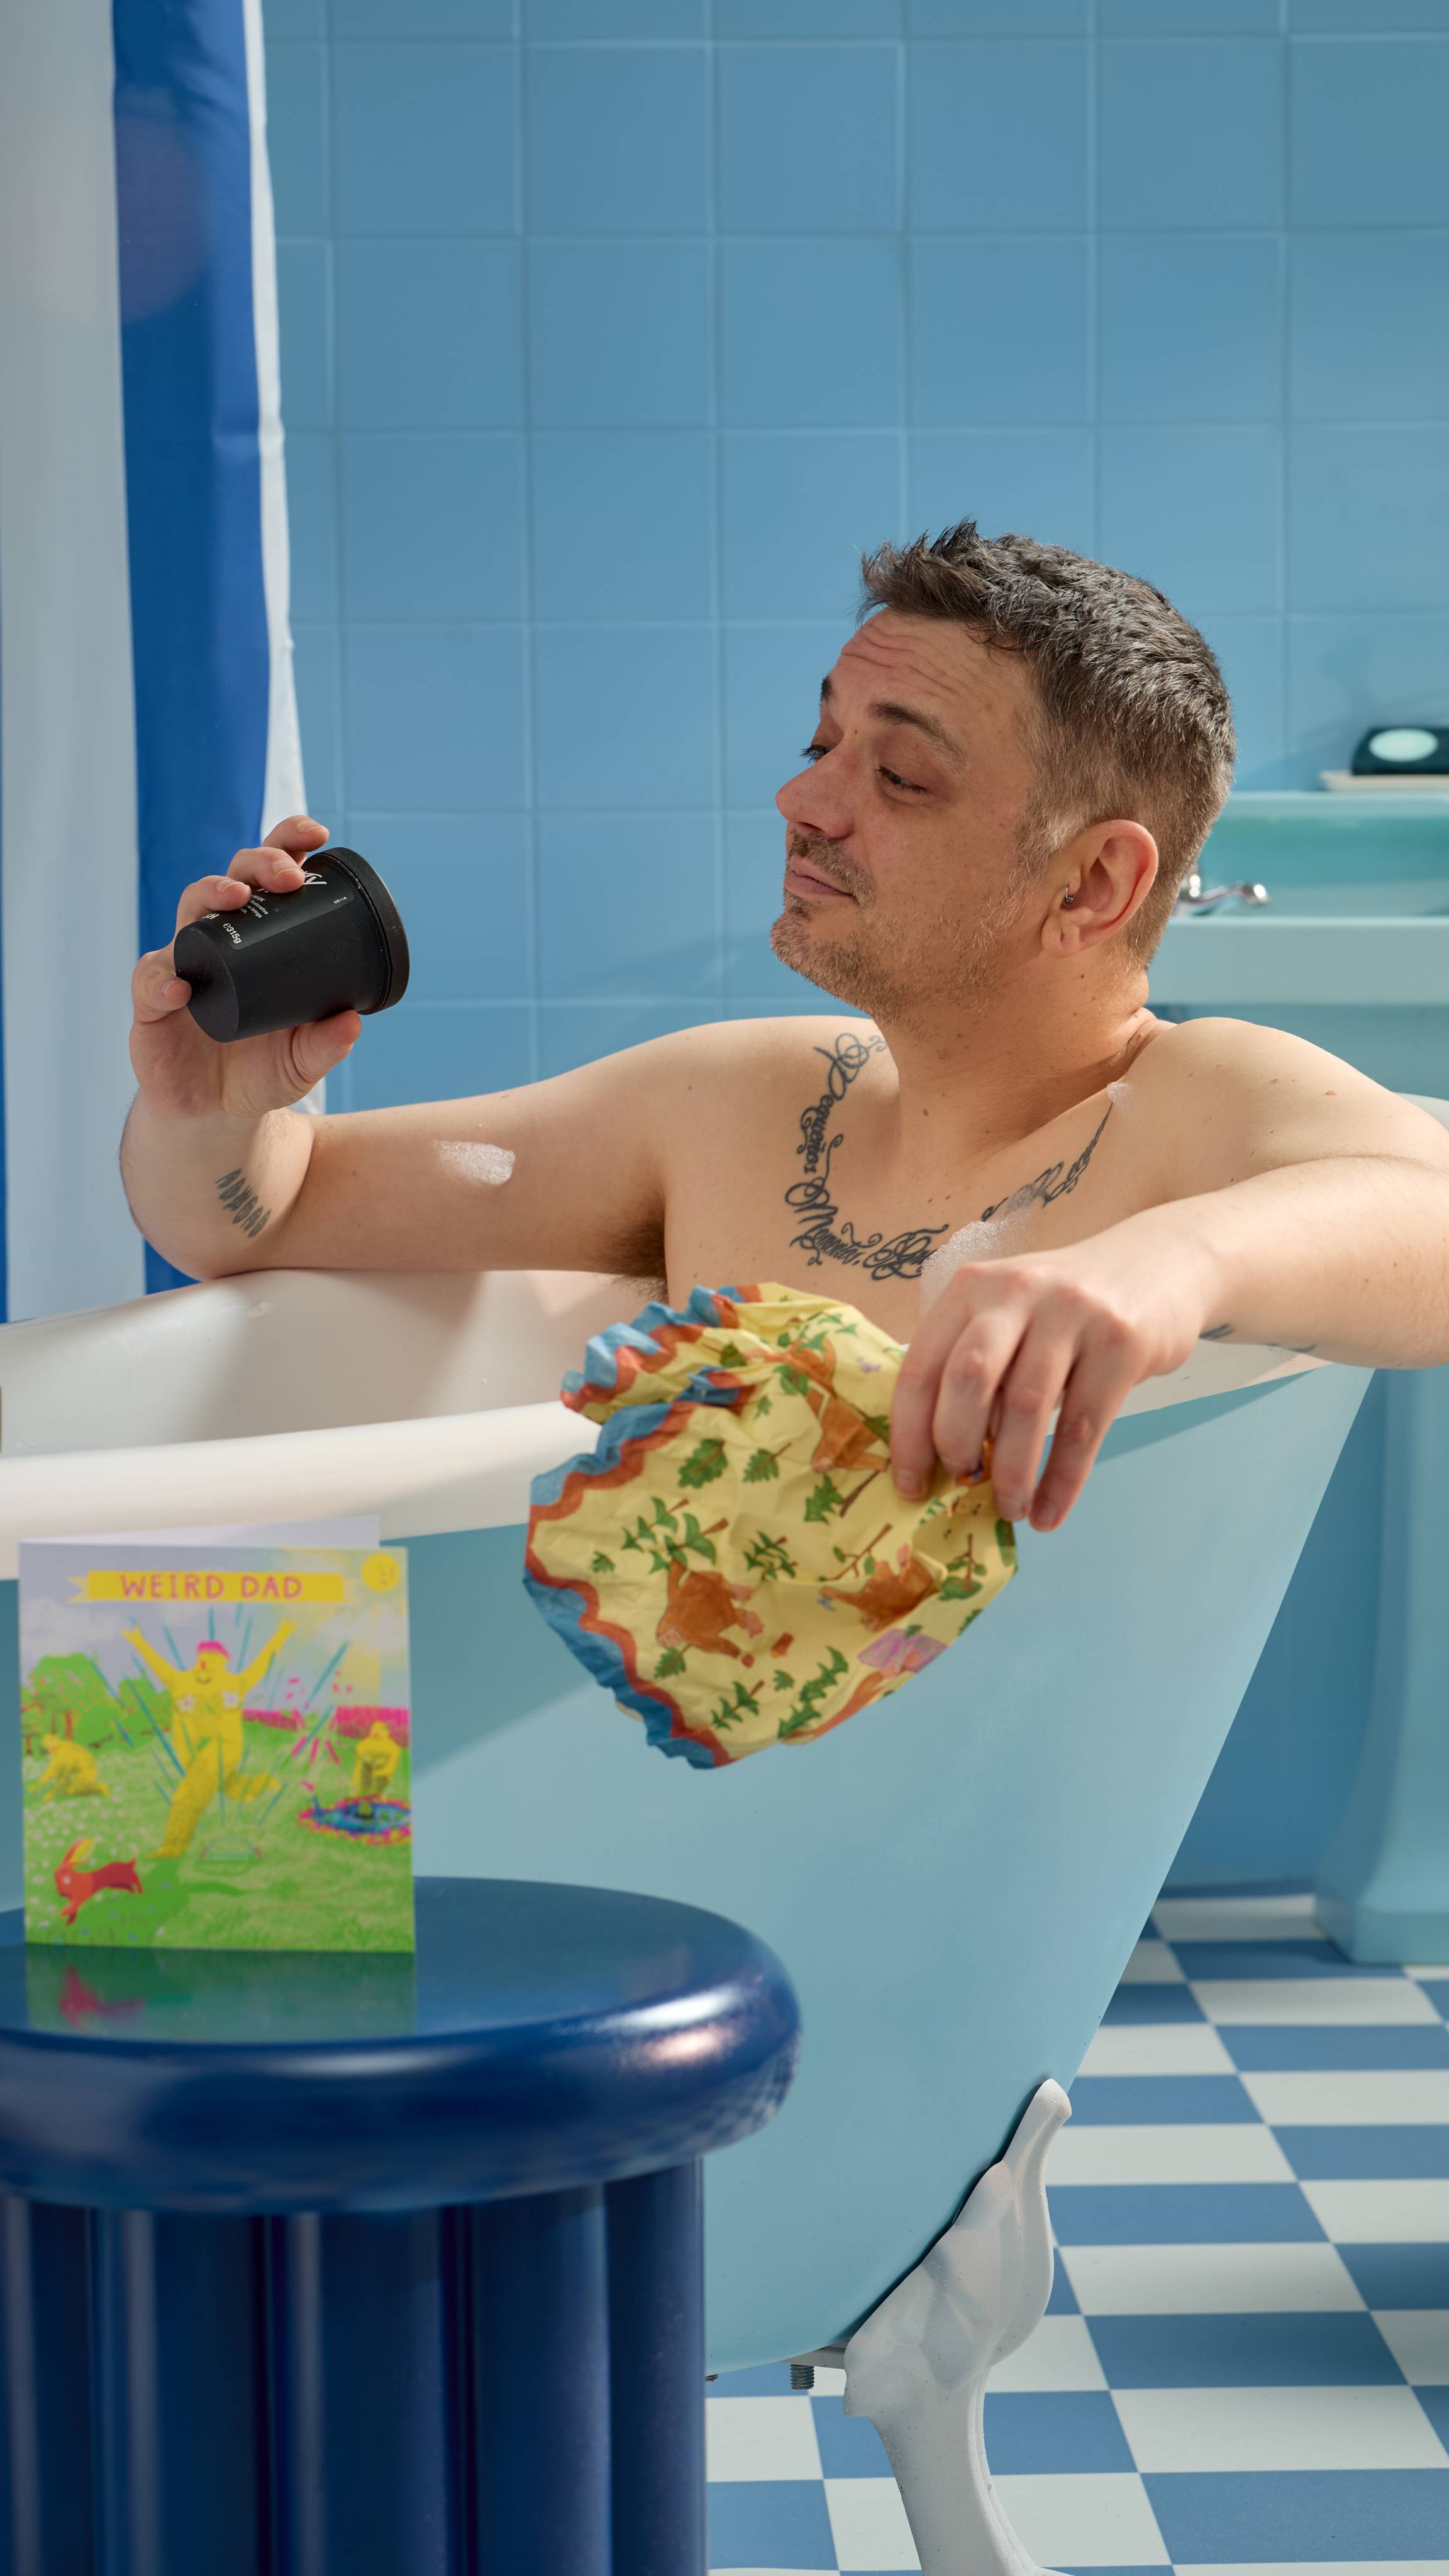 The Model is sitting in a roll-top bathtub in a blue, tiled room and has unwrapped a potted Lush product from the Big Foot Goes Camping lokta wrap. 